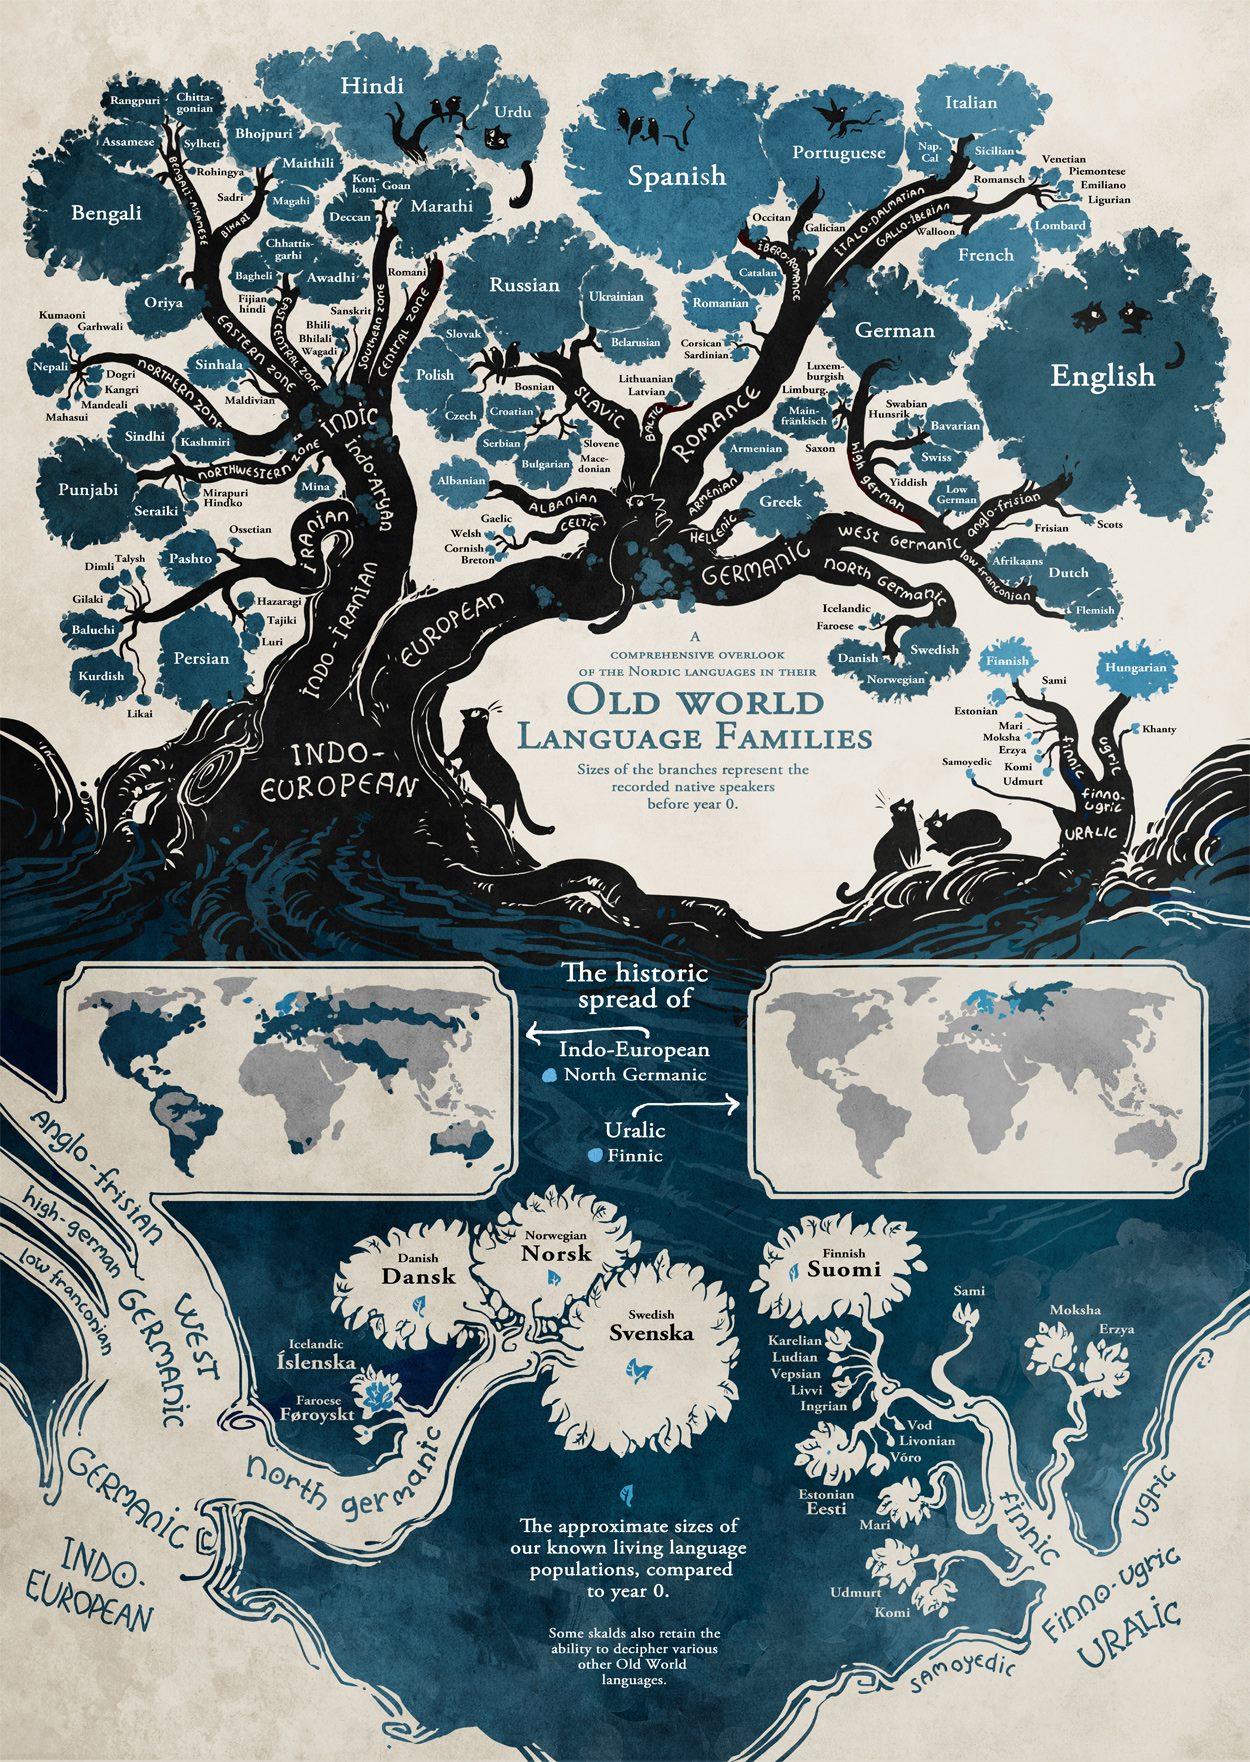 Connections between languages